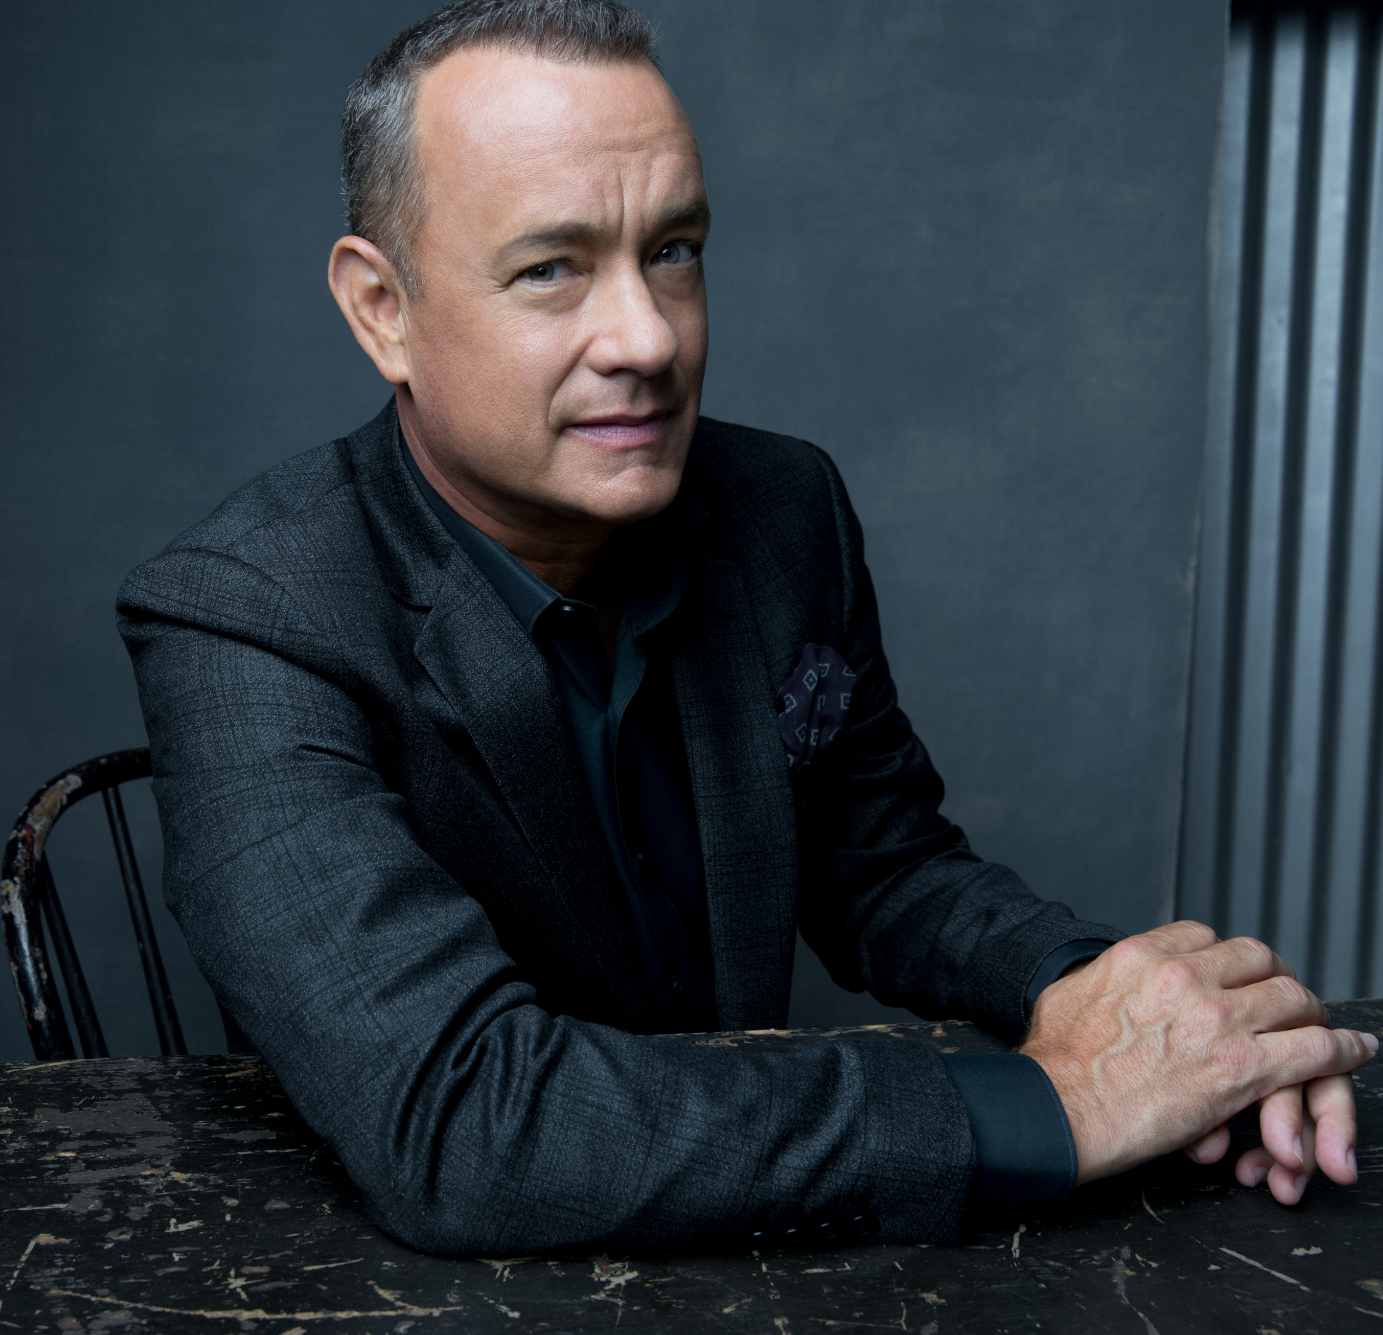 Tom Hanks' debut novel explores how Hollywood makes its movies